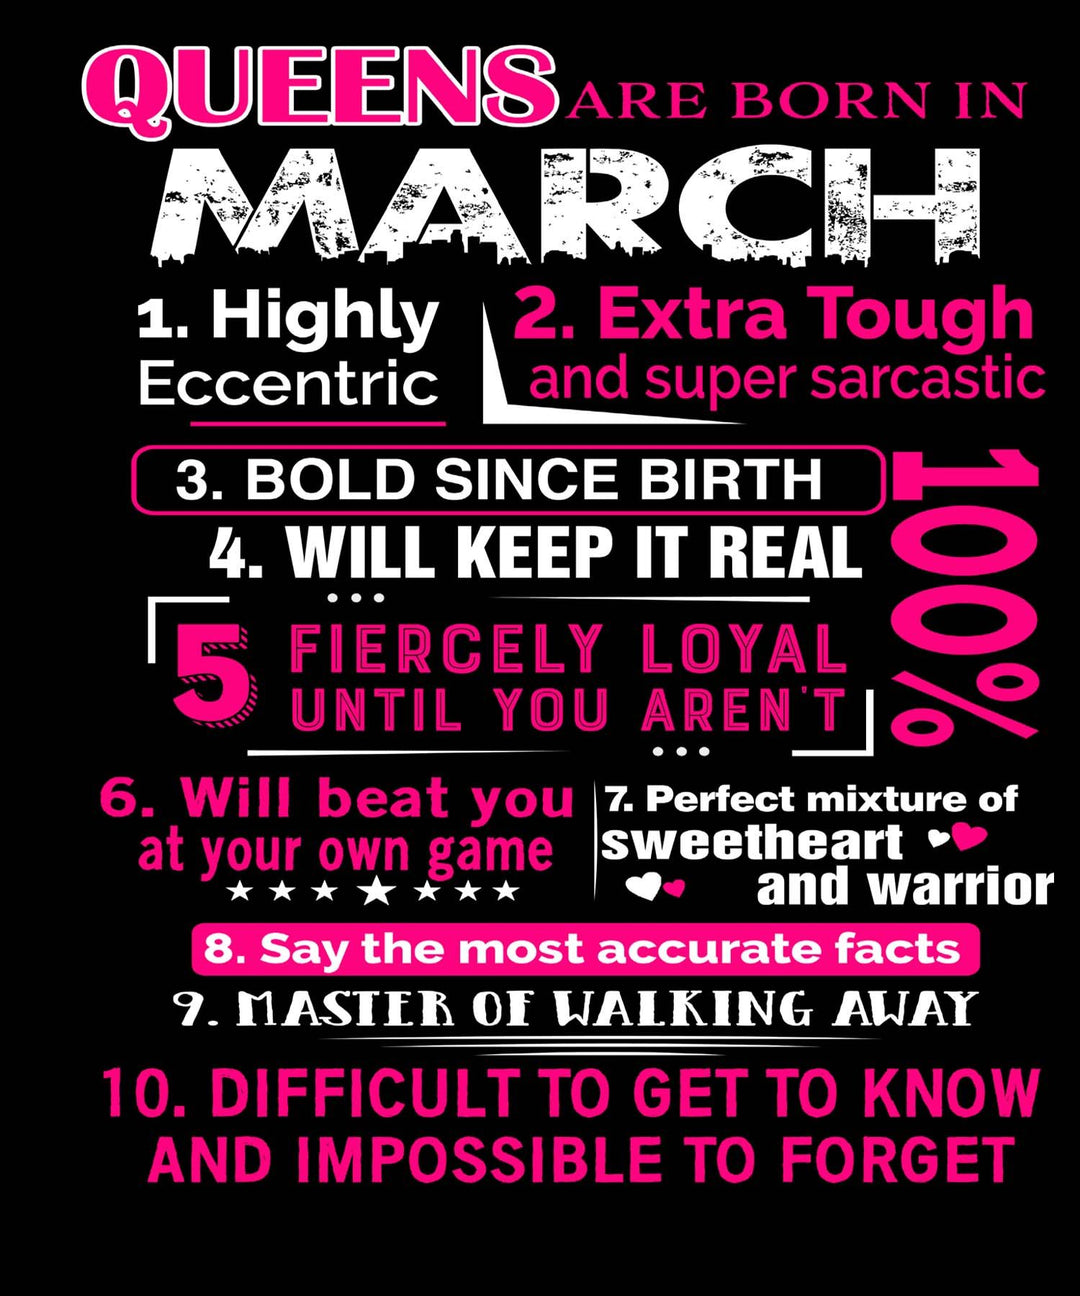 10 REASONS QUEENS ARE BORN IN MARCH, GET BIRTHDAY BASH